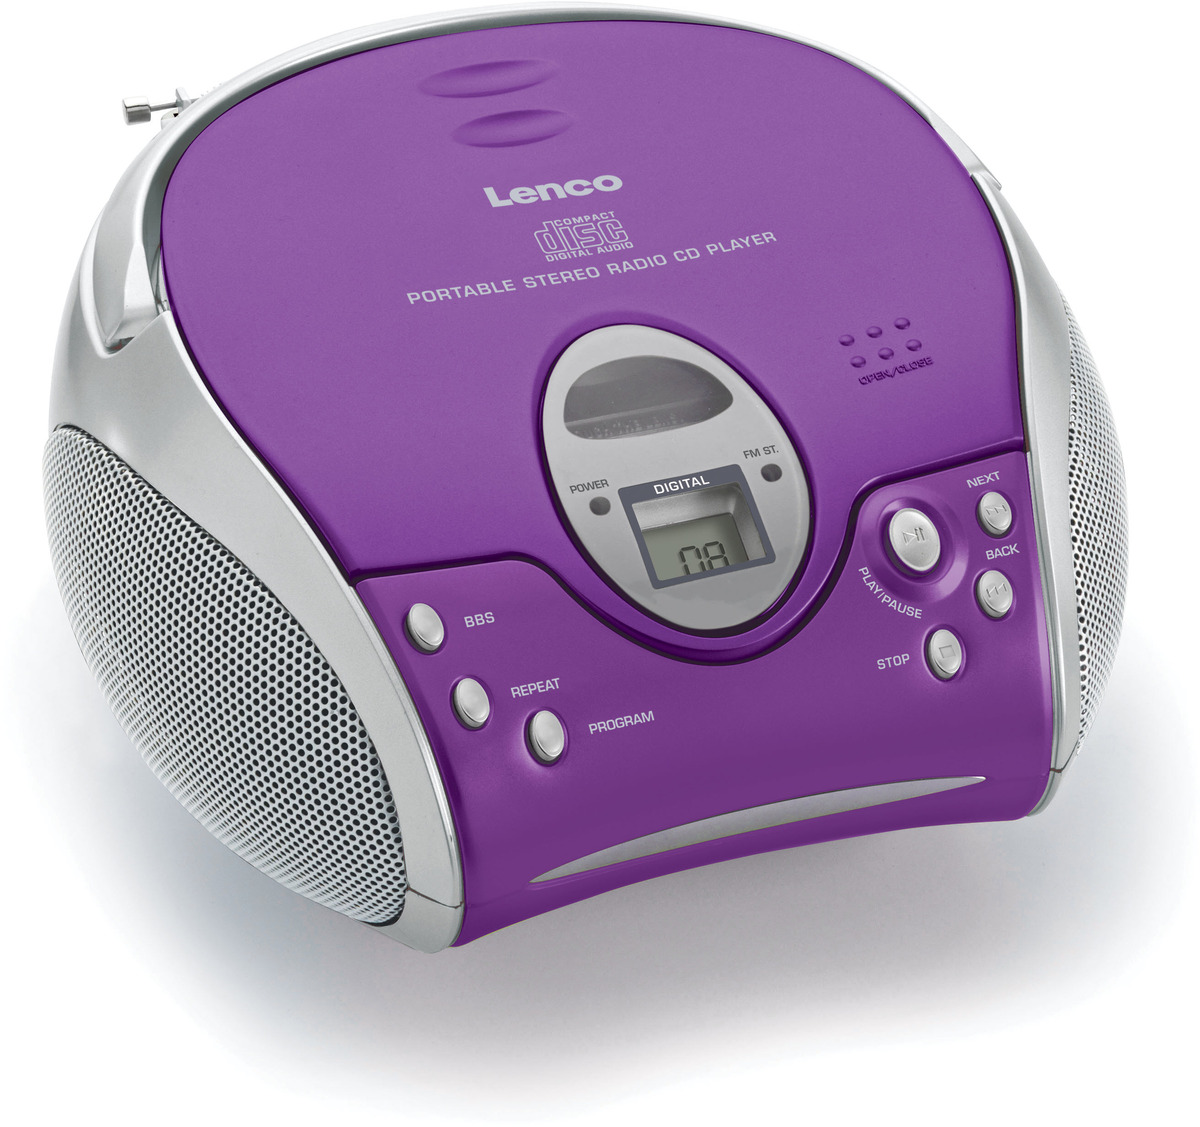 Lenco SCD-24 Stereo UKW-Radio mit CD-Player (Lila/Silber) - best4you